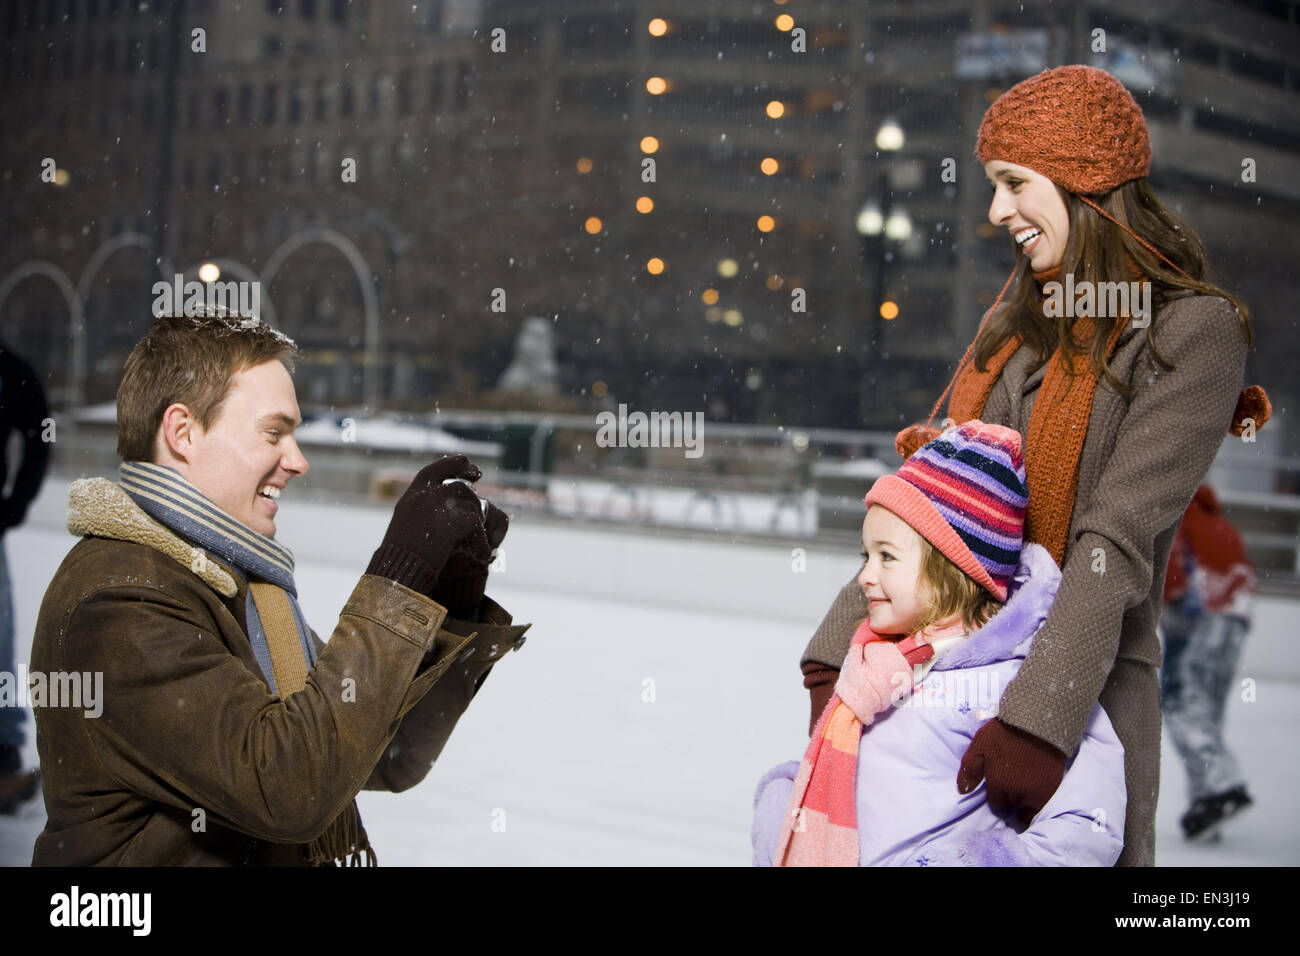 Man taking picture of woman and girl outdoors in winter Stock Photo